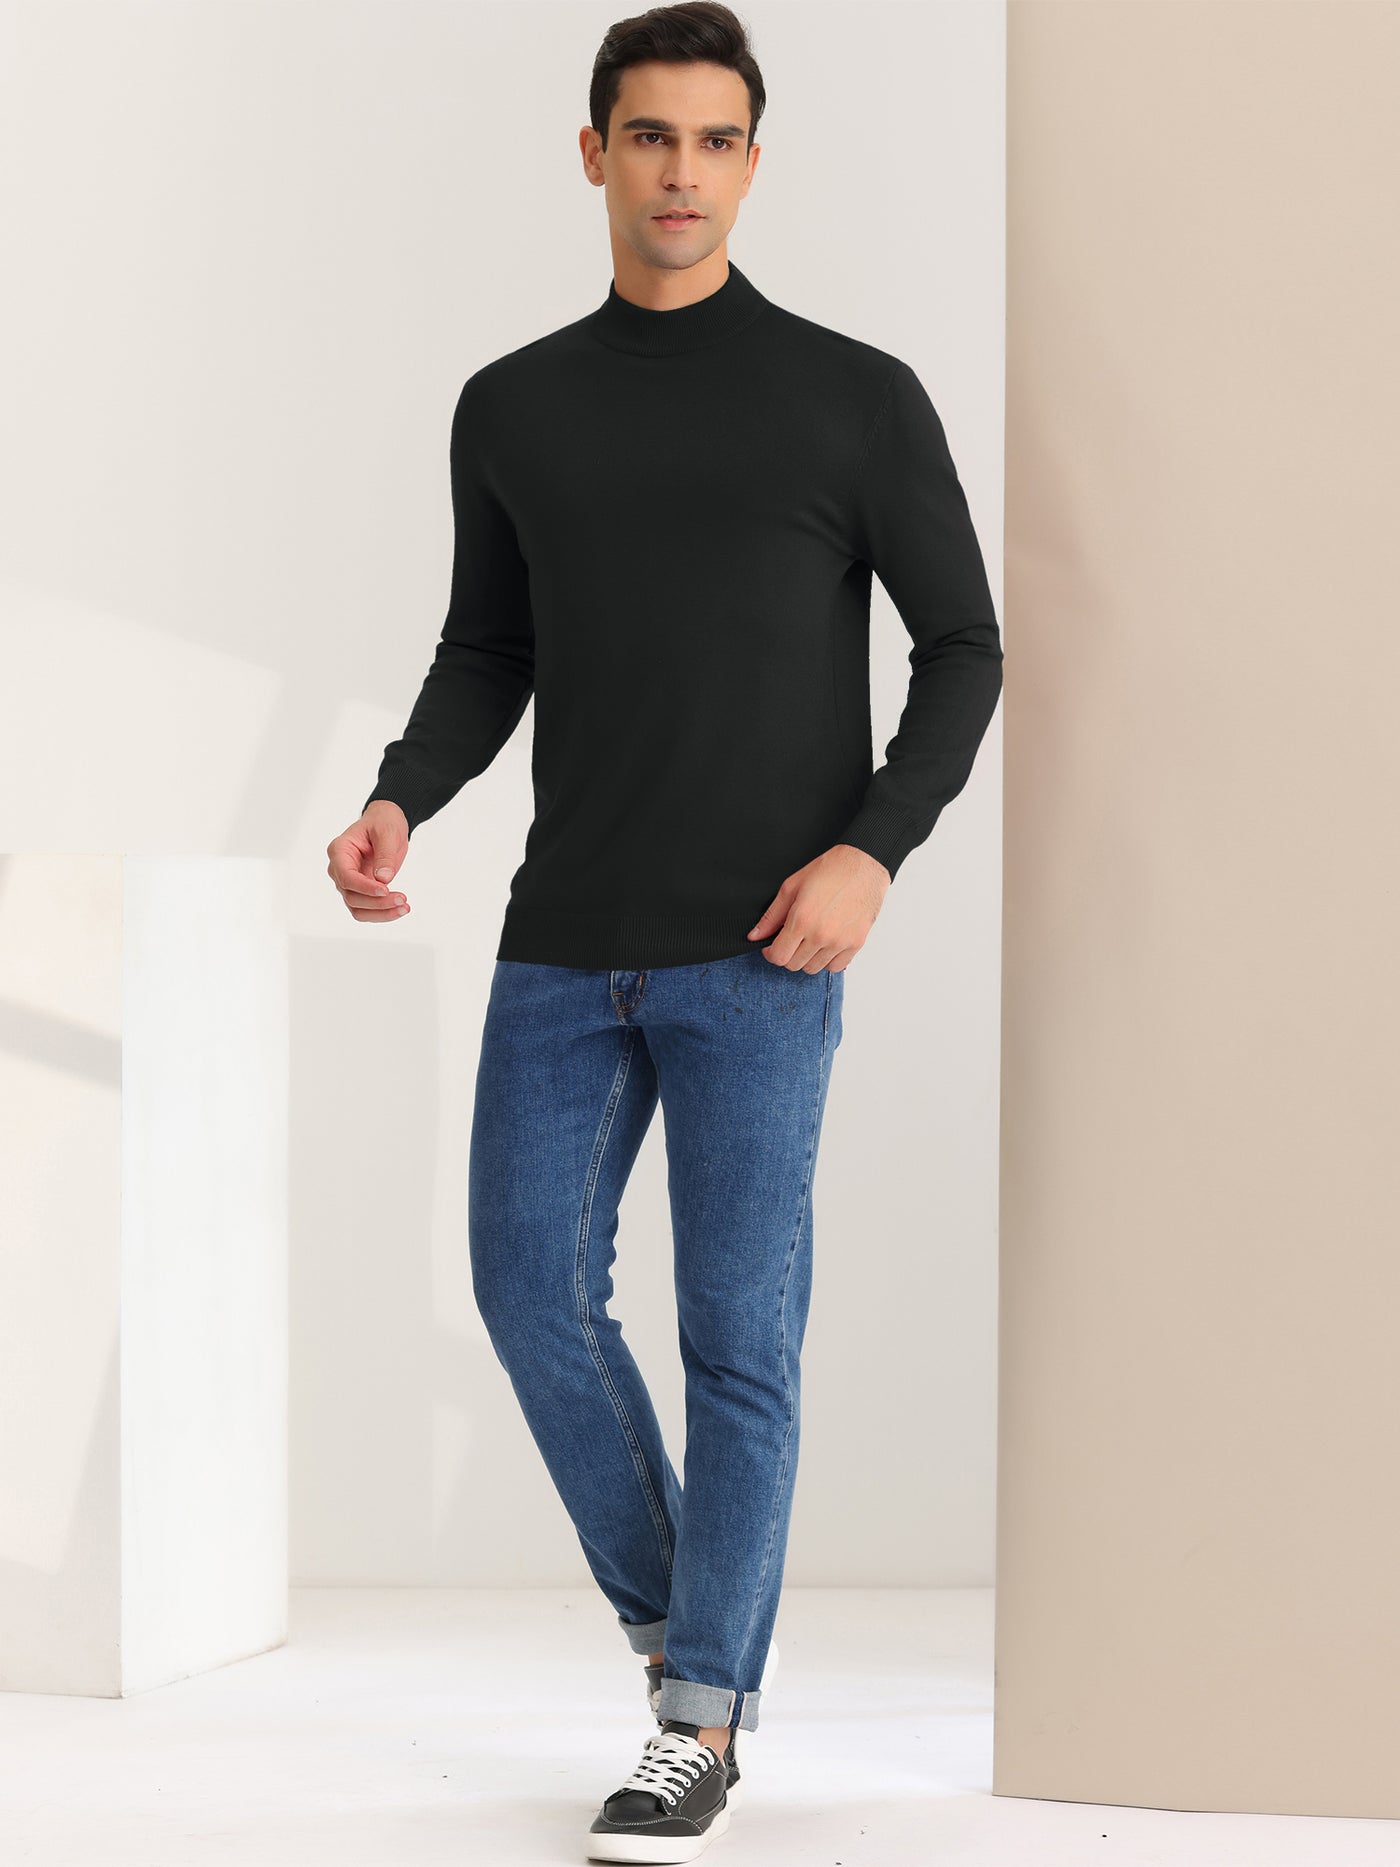 Bublédon Men's Mock Neck Sweater Solid Color Classic Long Sleeves Knit Pullover